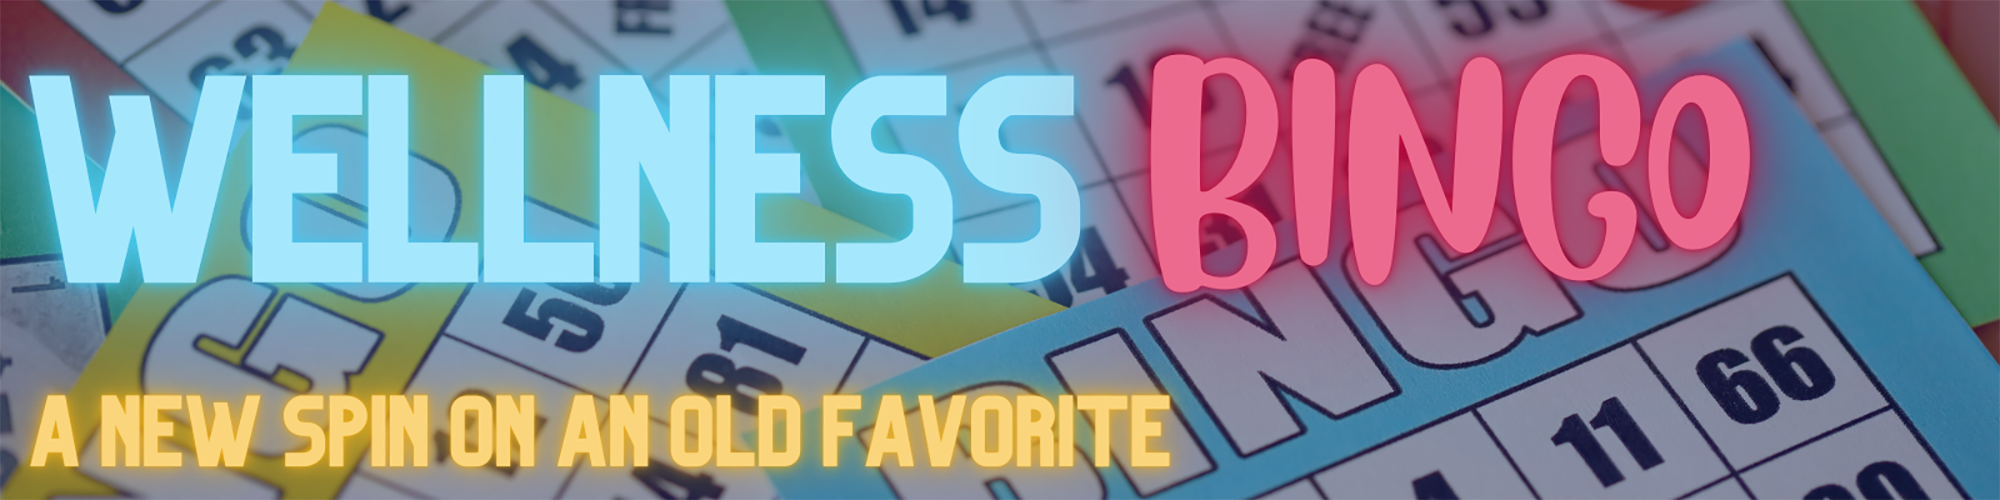 Wellness Bingo a new spin on an old favorite